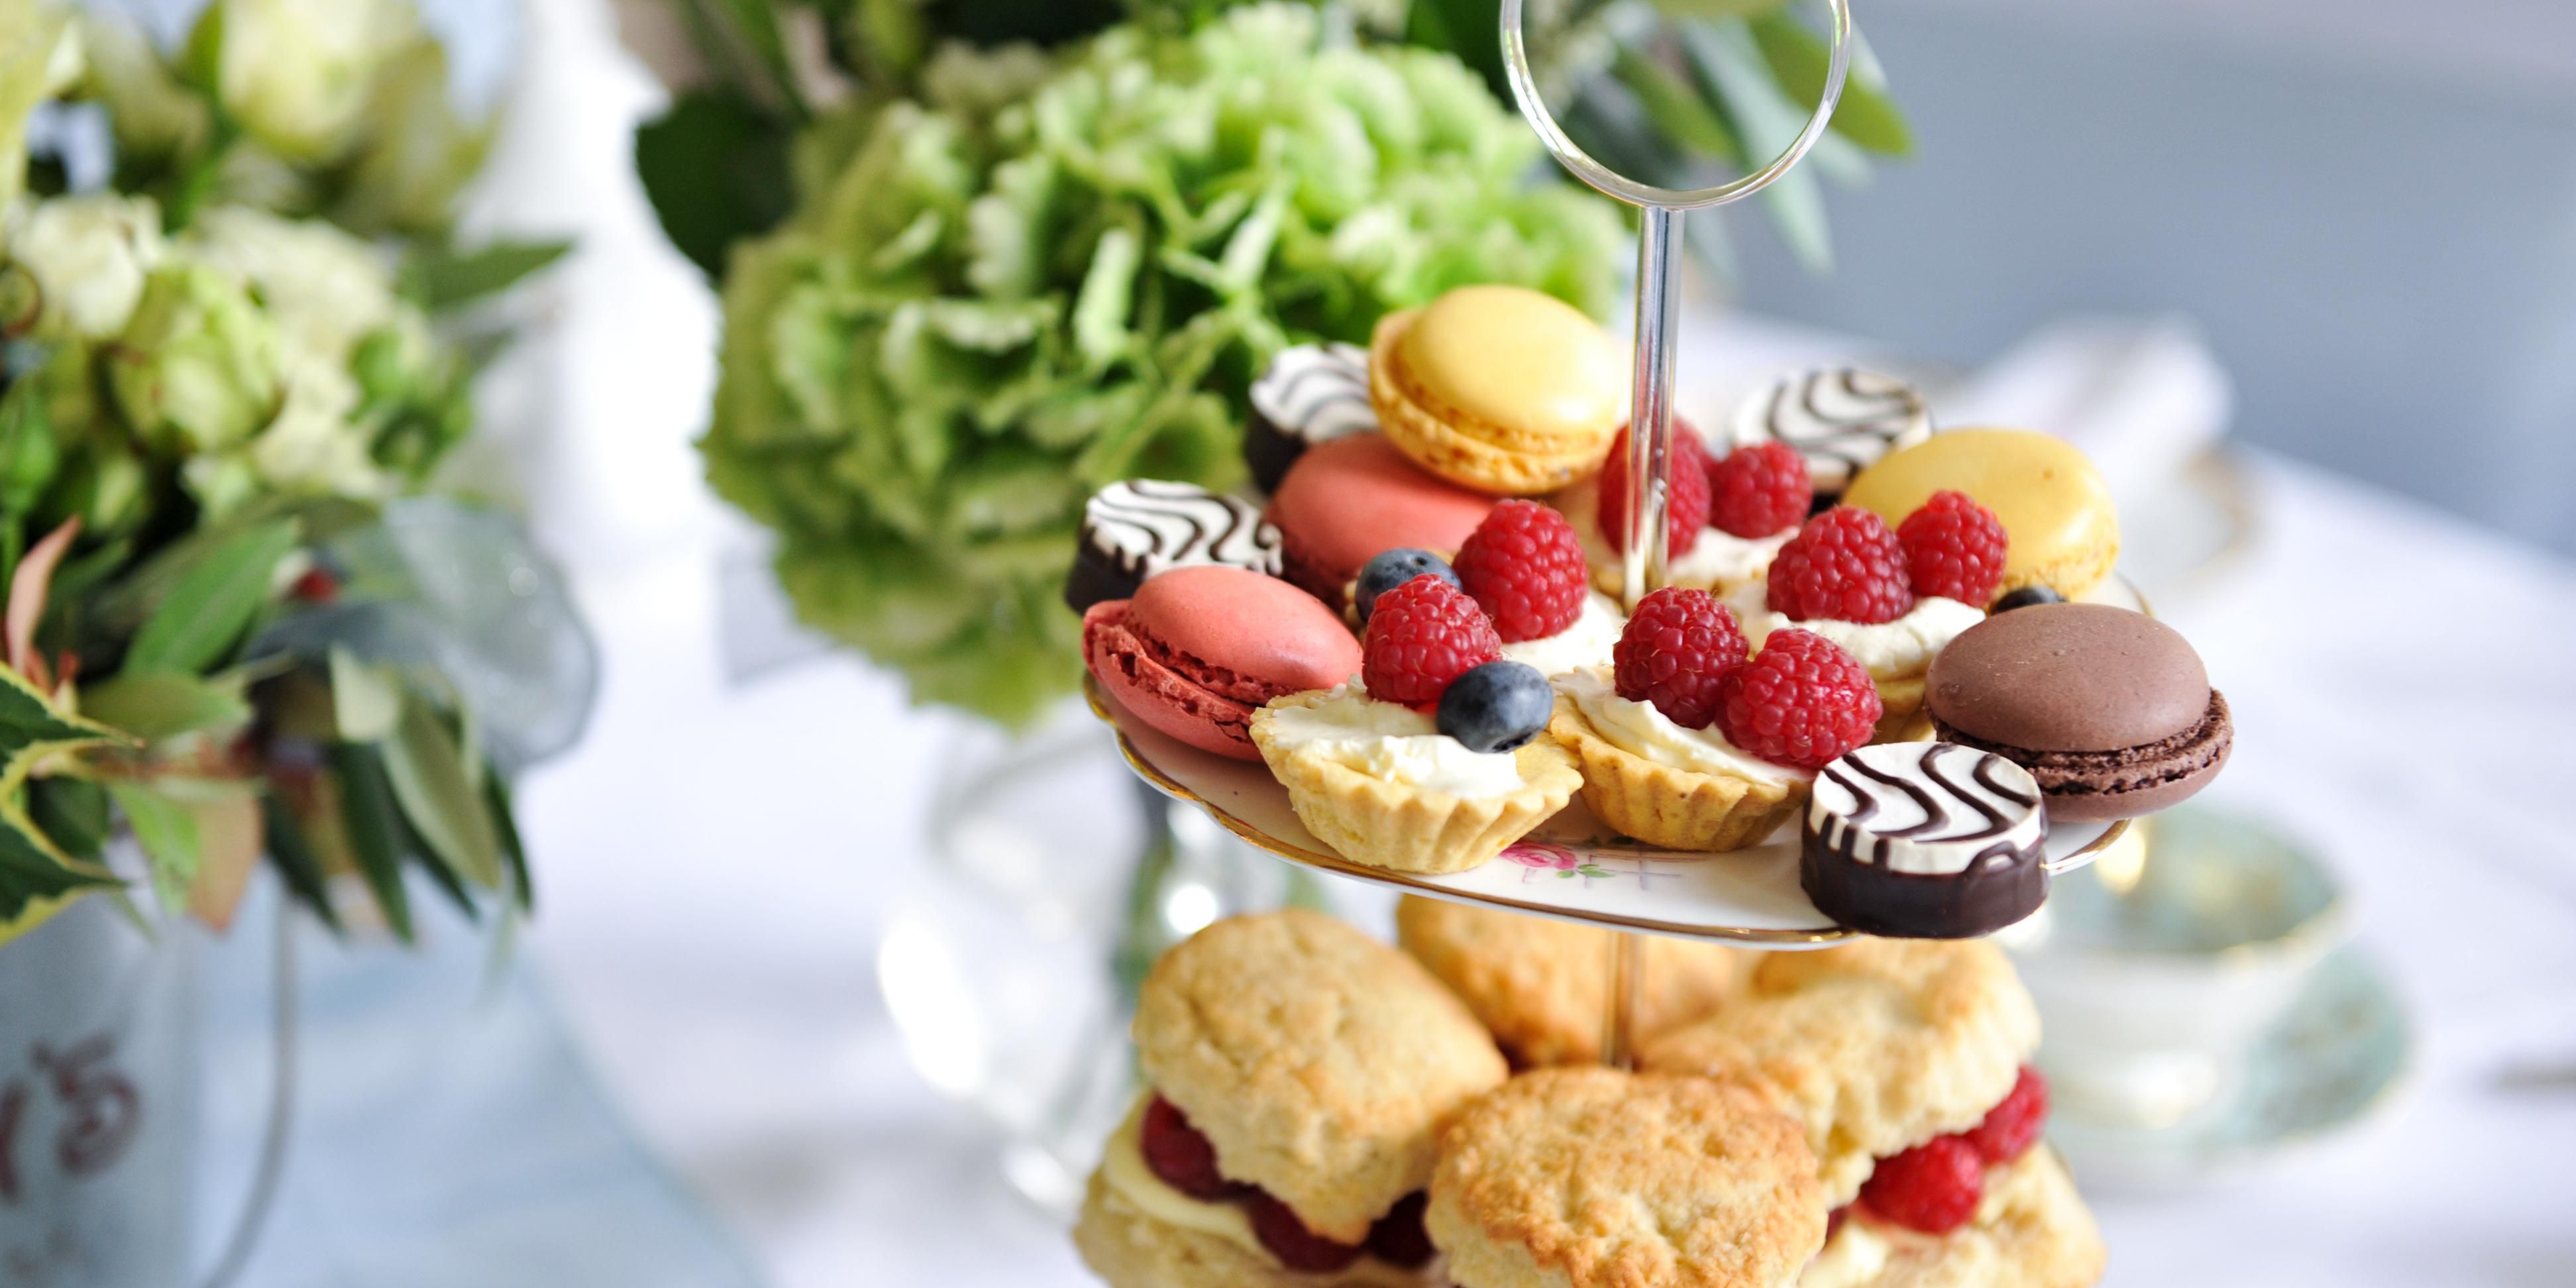 Join us for Afternoon Tea on Saturday, October 7 from 12pm to 3pm in the Oak Room Restaurant. $55 for Adults and $12 for Children under 12.